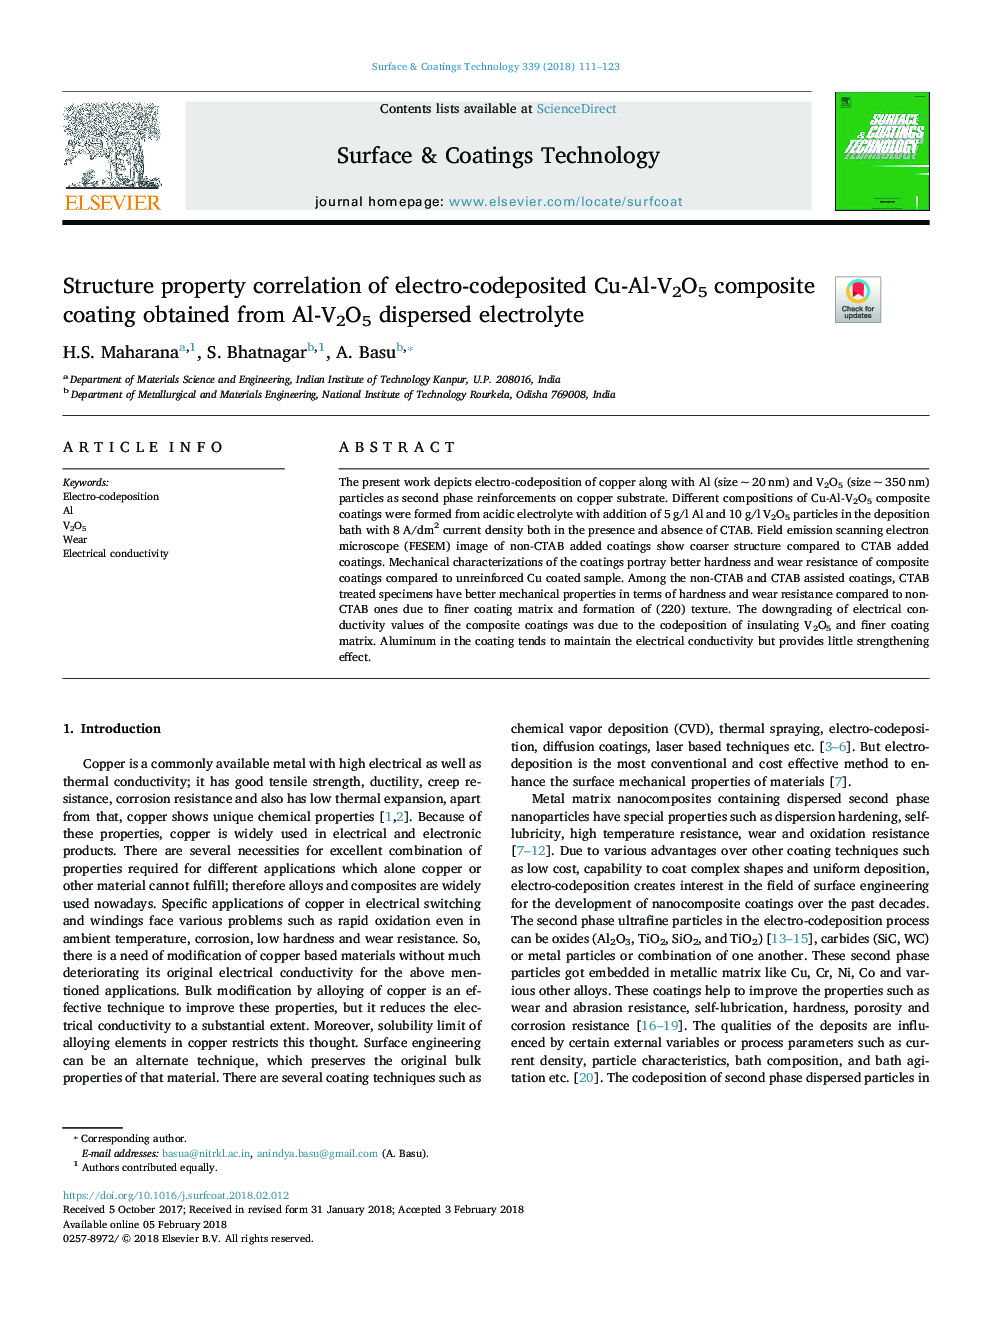 Structure property correlation of electro-codeposited Cu-Al-V2O5 composite coating obtained from Al-V2O5 dispersed electrolyte